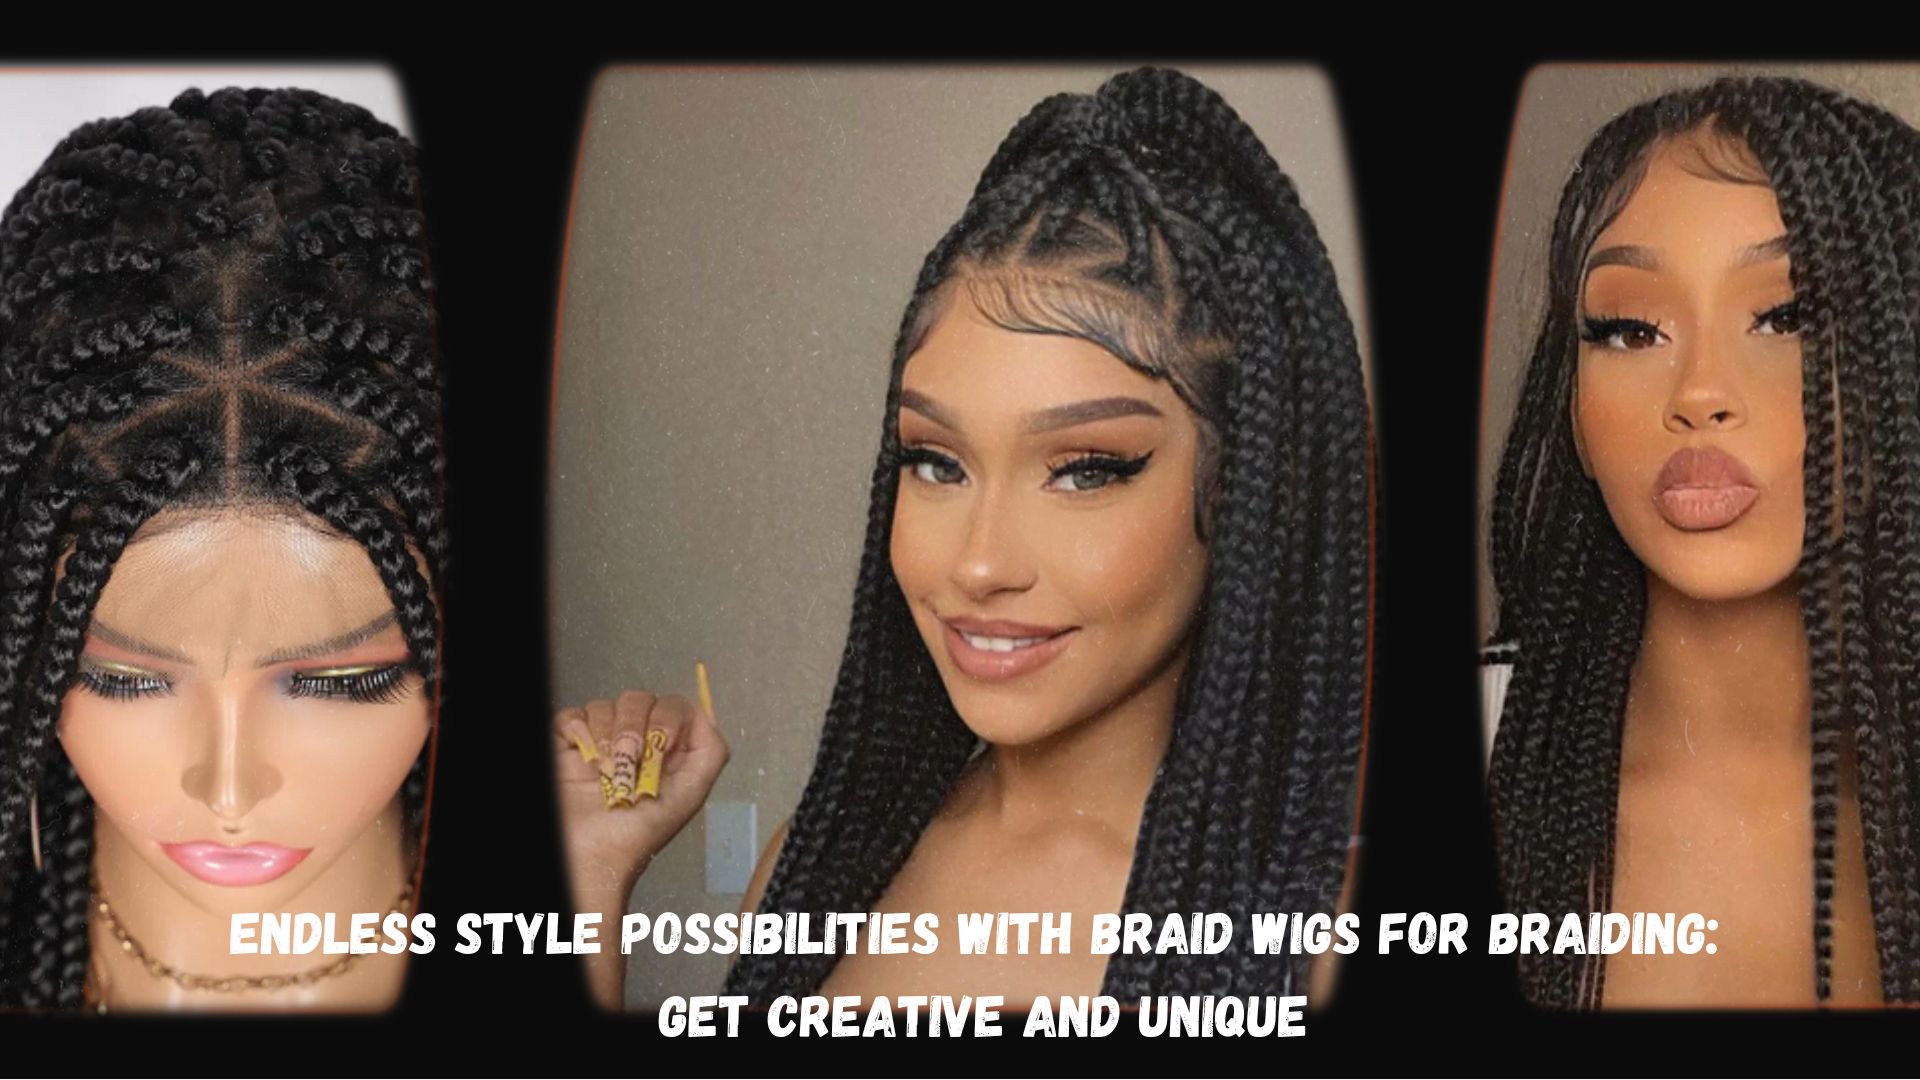 Endless Style Possibilities with Braid Wigs for Braiding: Get Creative and Unique